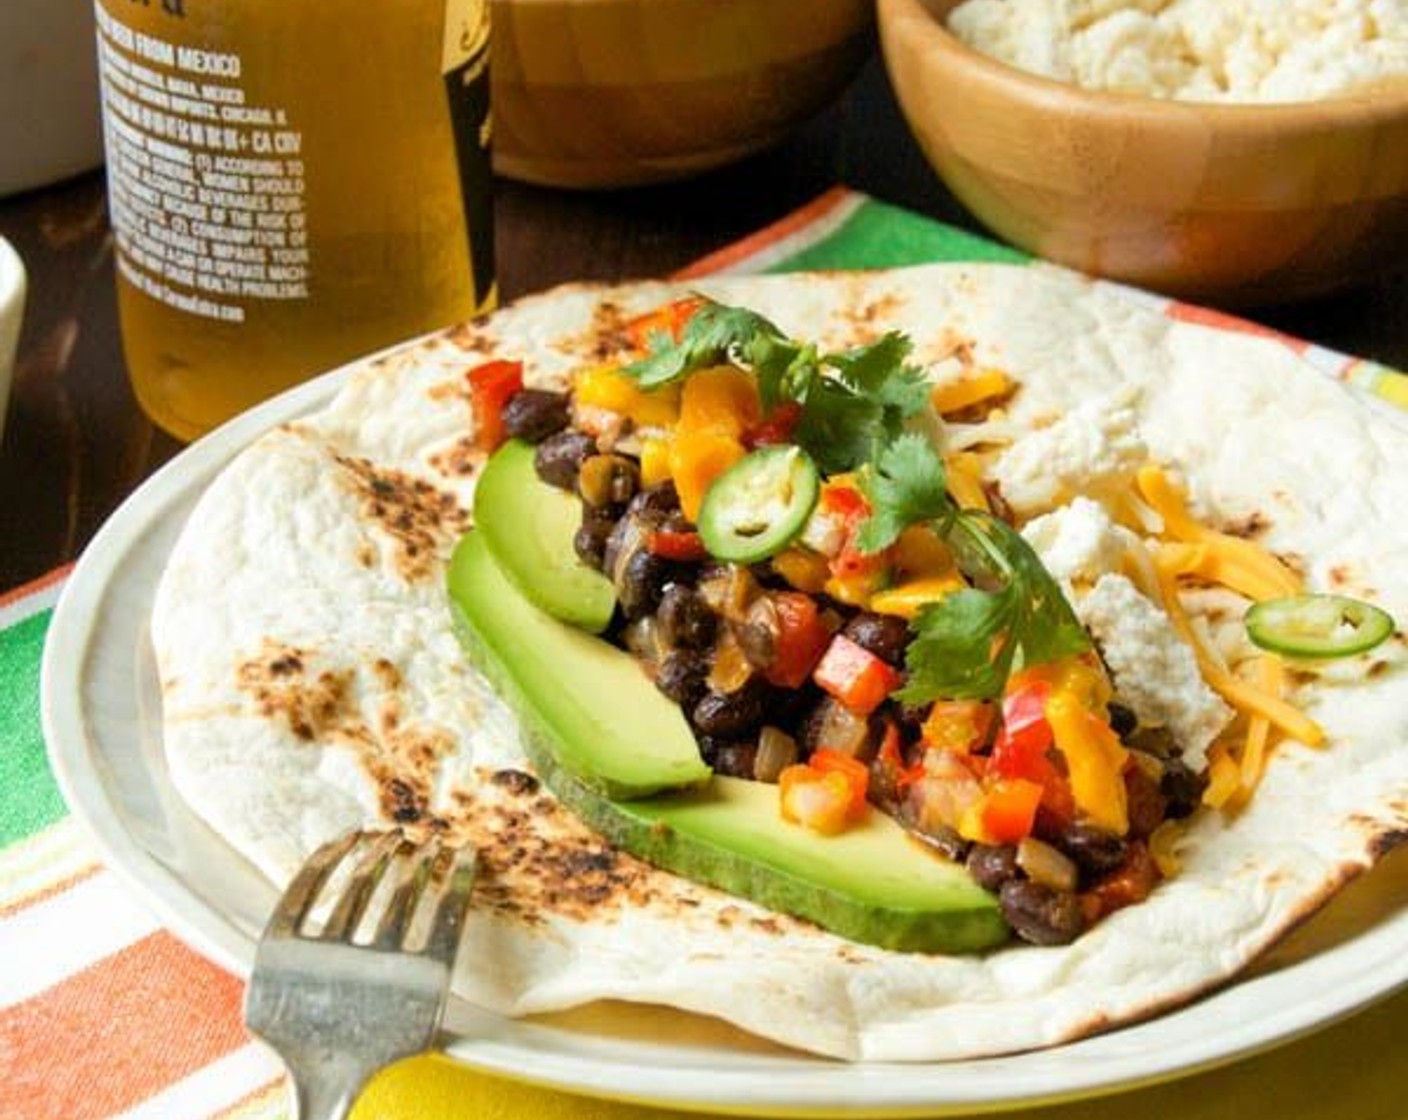 step 8 Assemble the tacos. Spoon the black beans into the tortilla shell. Tuck in a few slices of Avocado (1). Sprinkle with Cheddar Cheese (1/2 cup), top with mangoes salsa, Fresh Cilantro (1/2 cup) and lime wedge. Enjoy.